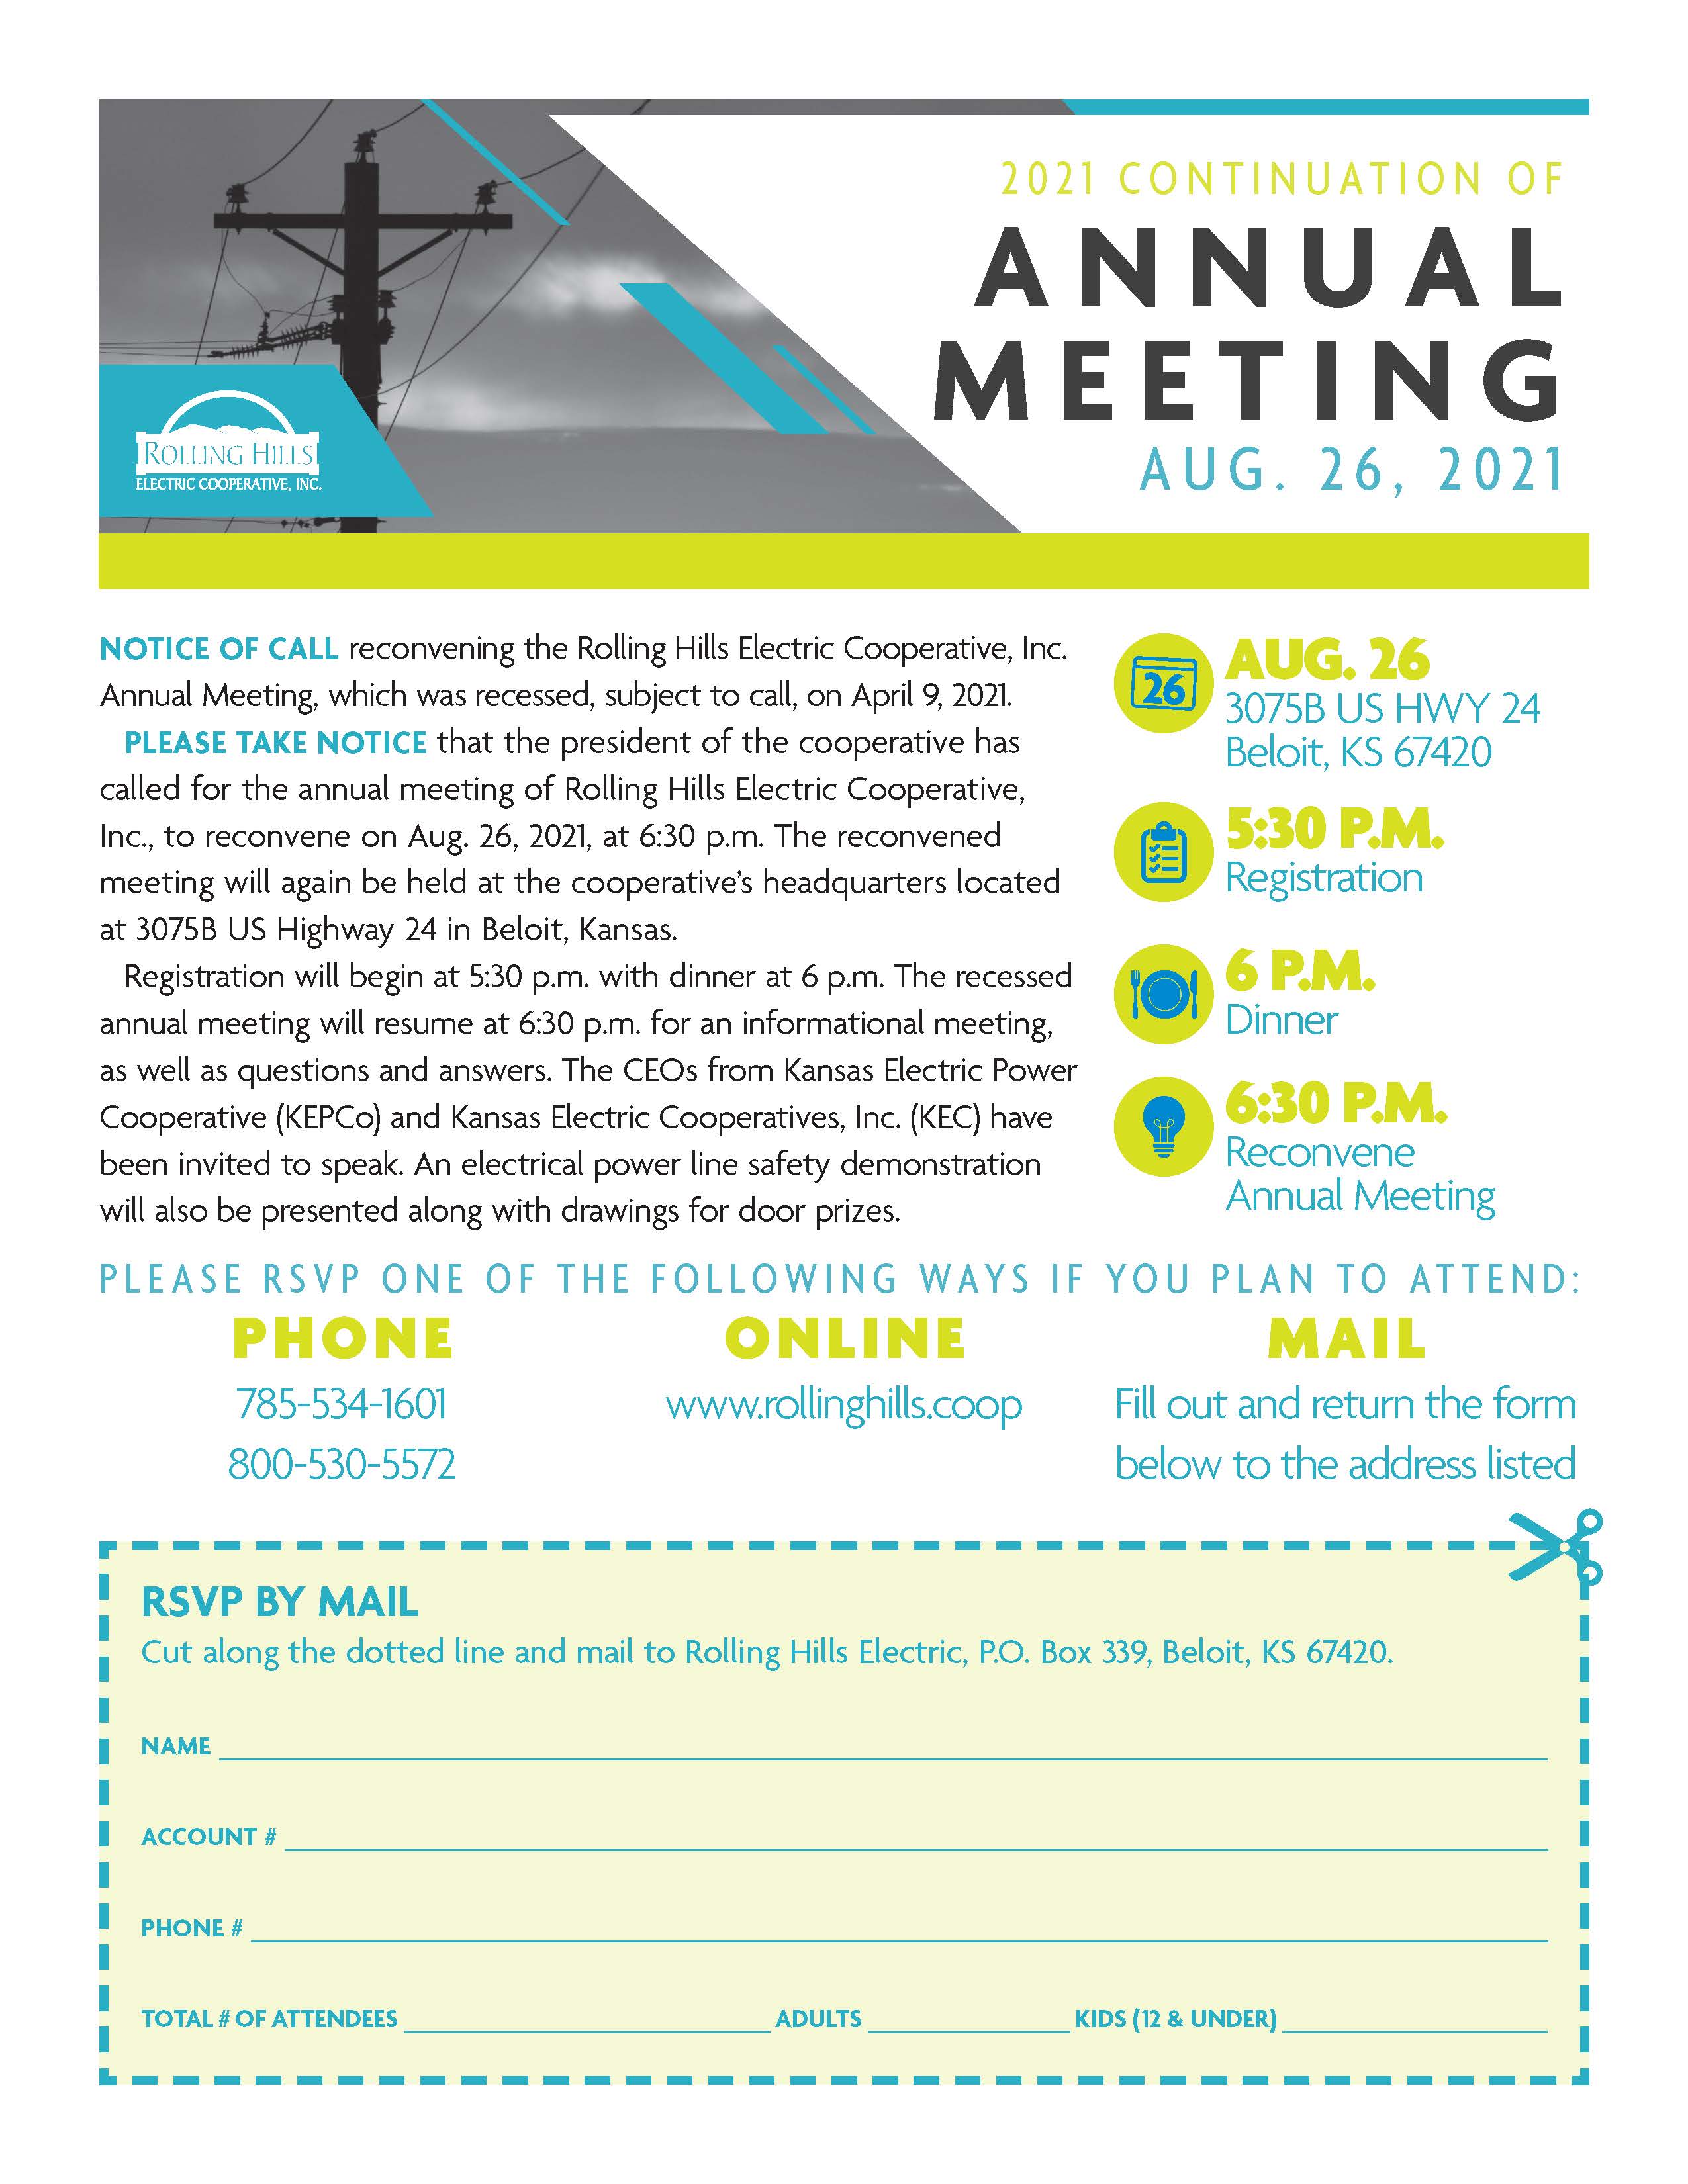 2021 Continuation of Annual Meeting RSVP